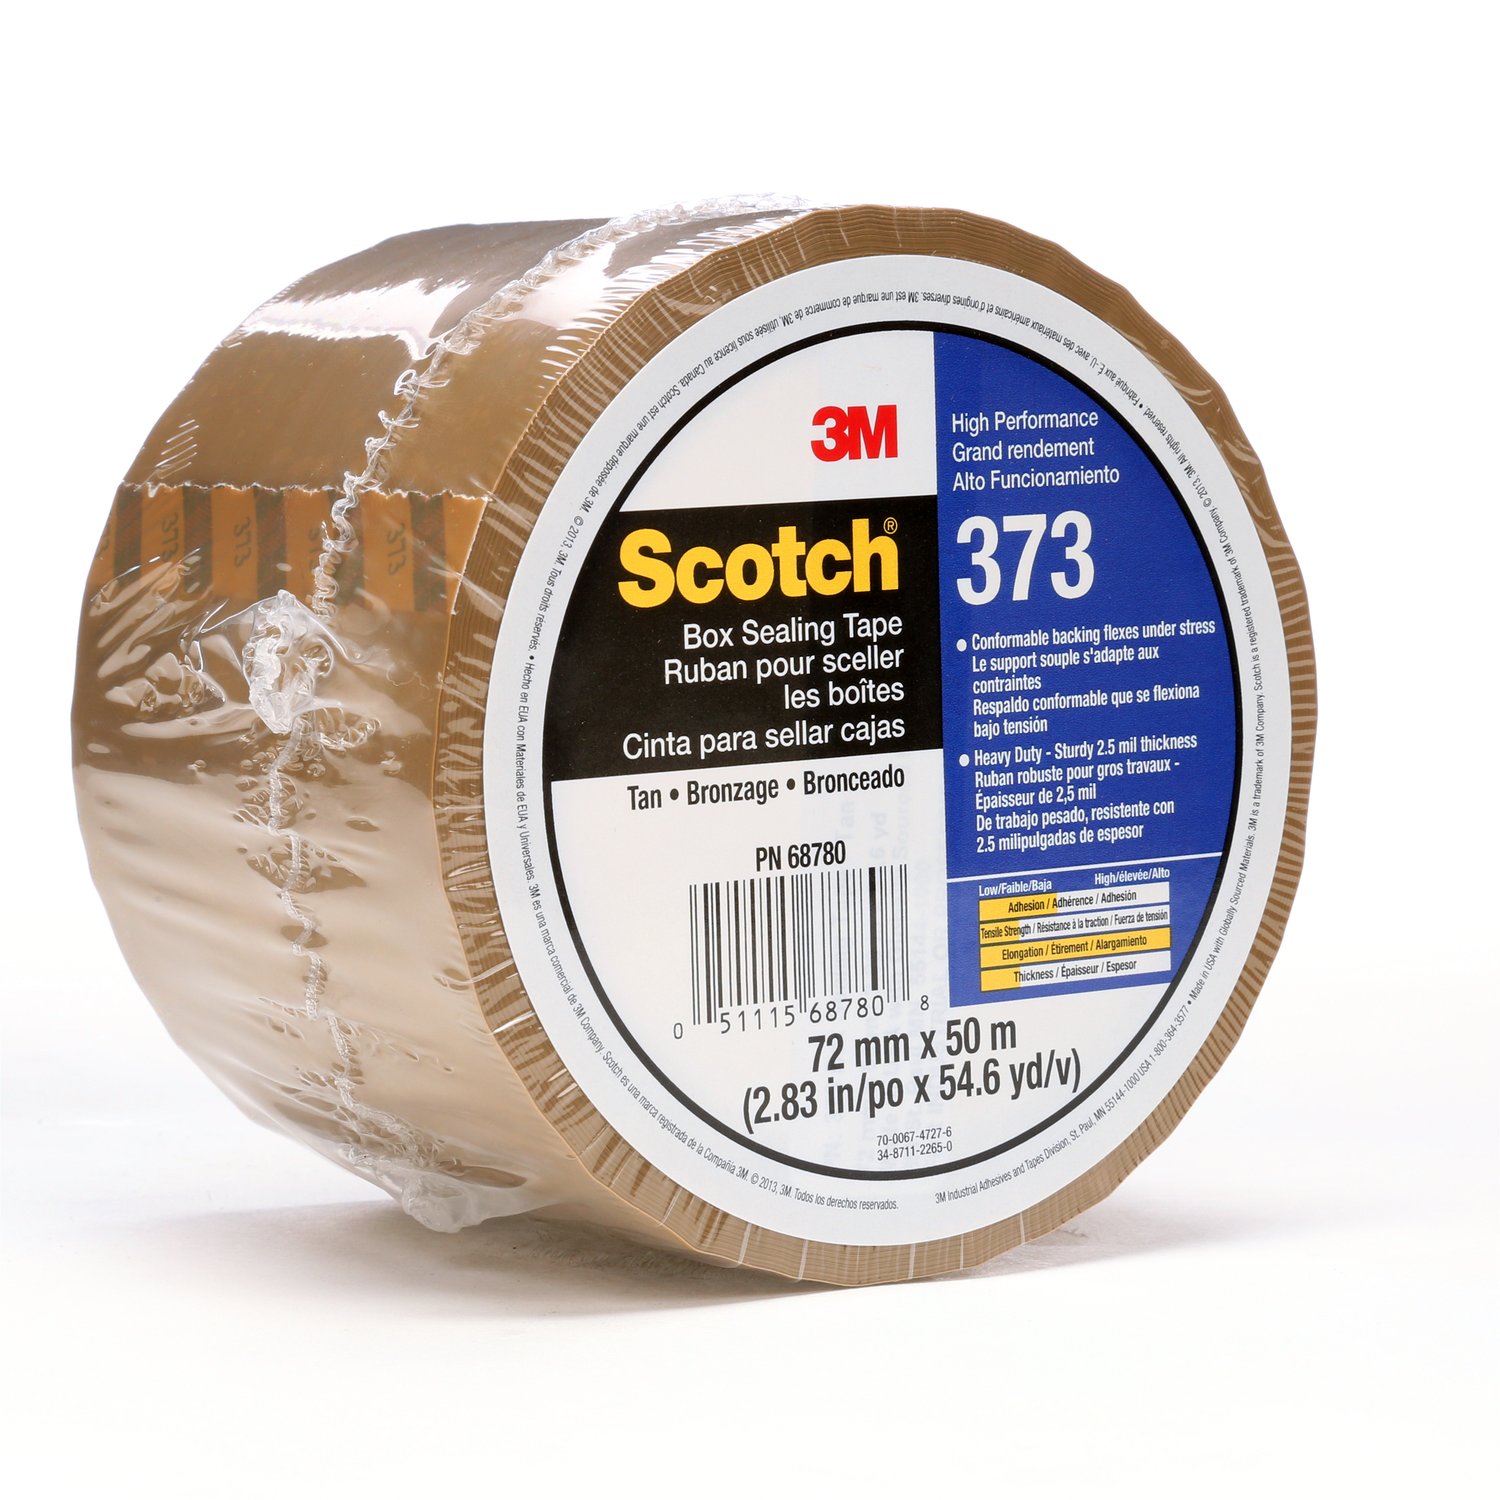 7010374965 - Scotch Box Sealing Tape 373, Tan, 72 mm x 50 m, 24/Case, Individually
Wrapped Conveniently Packaged